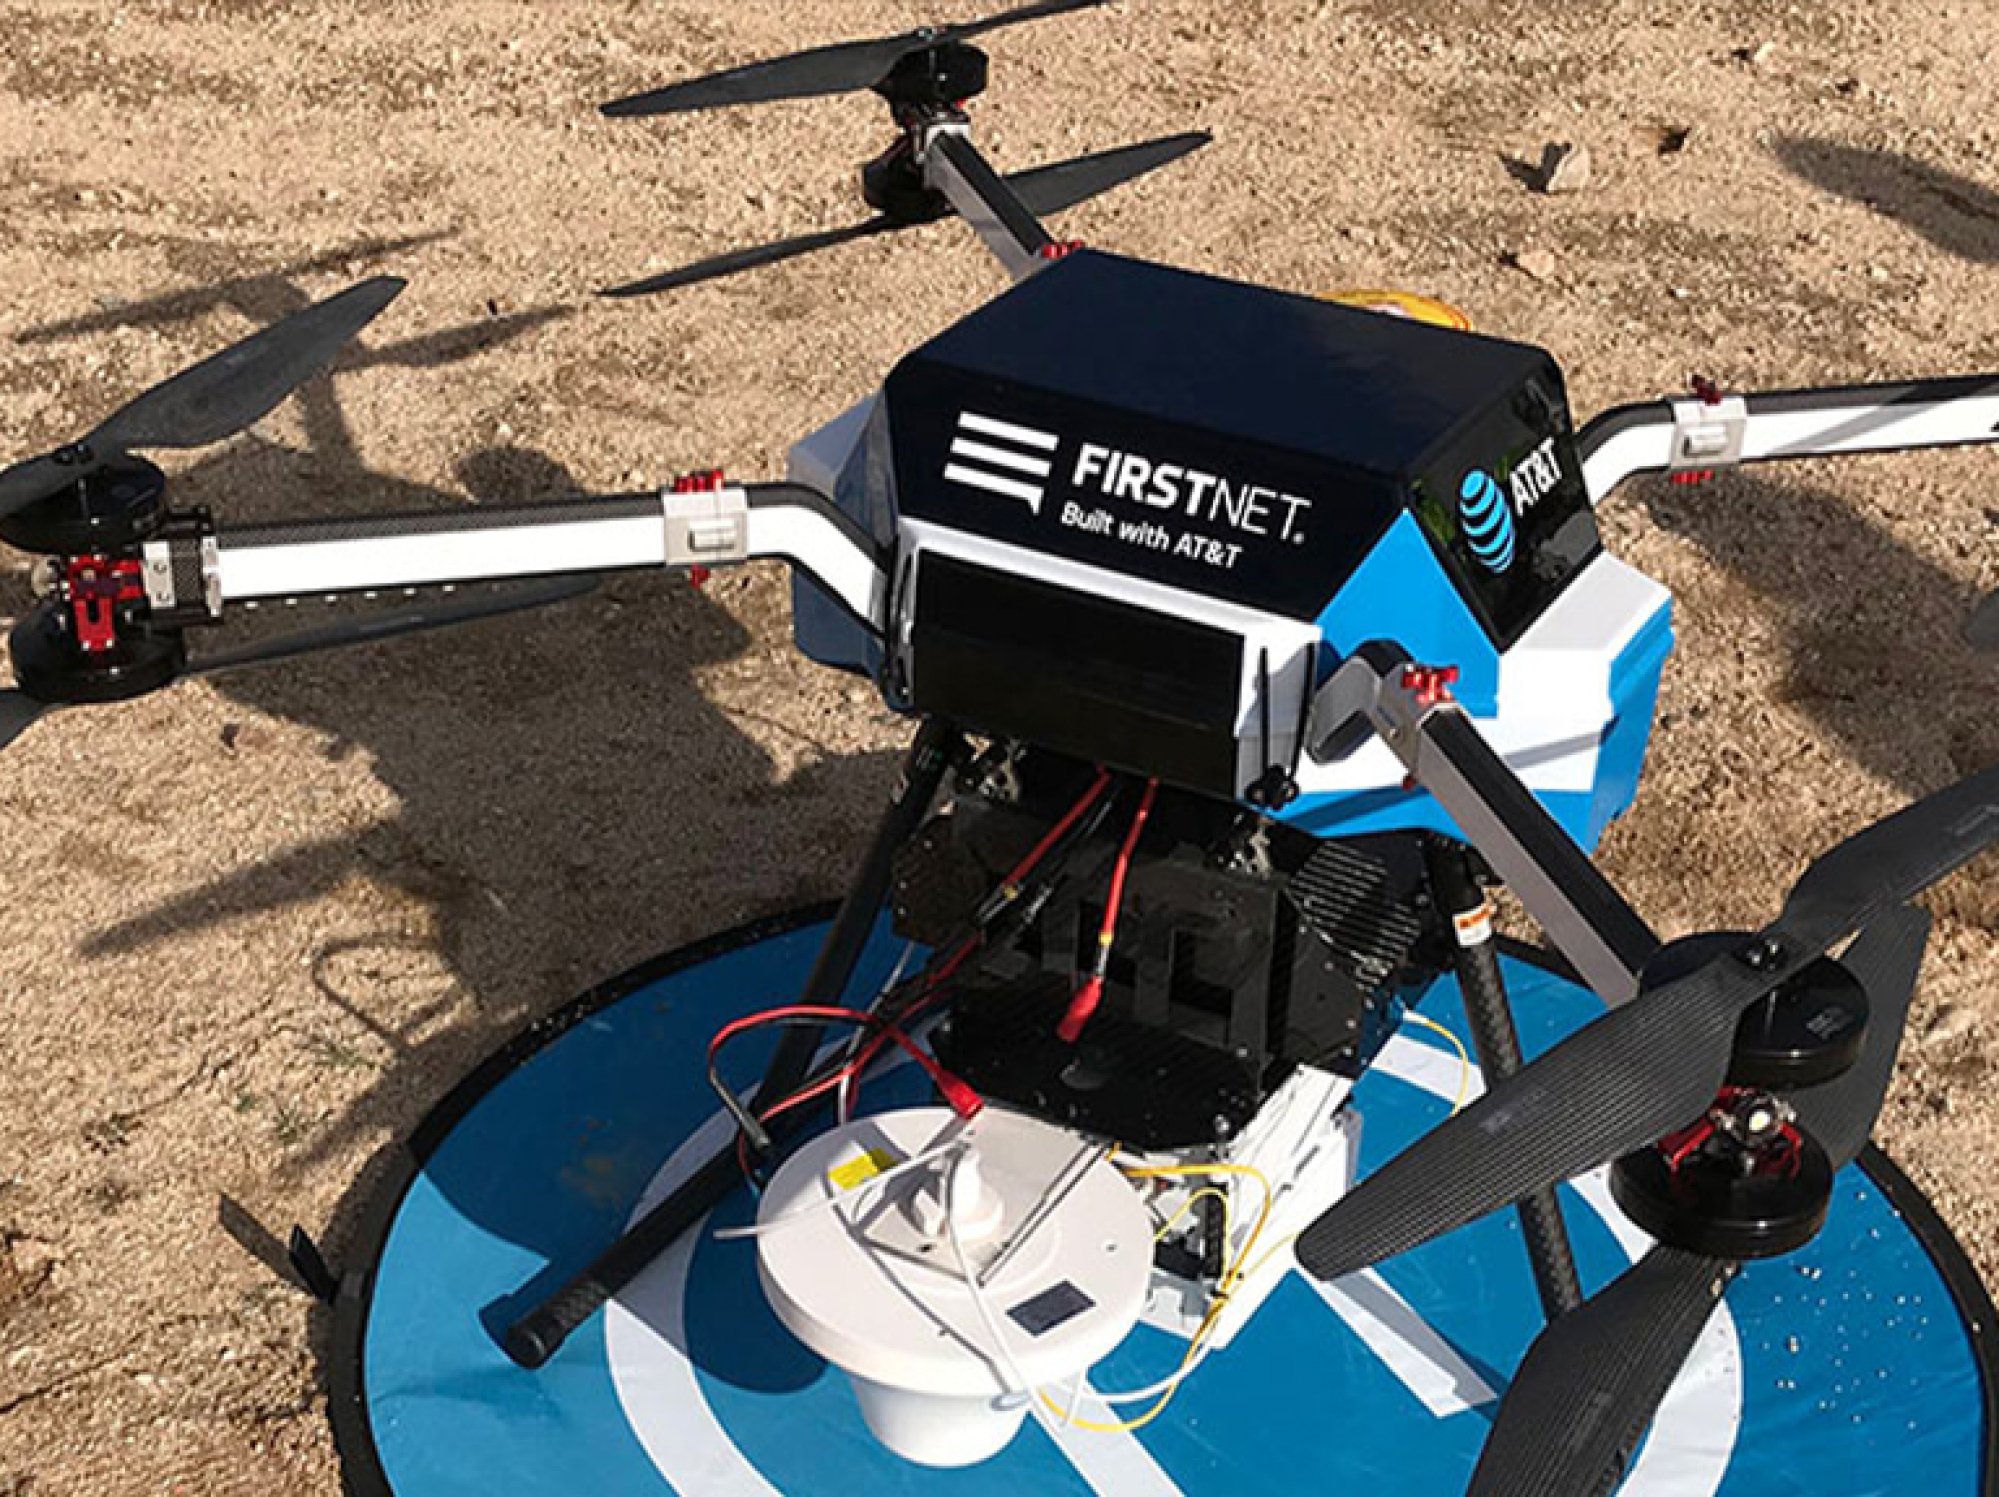 Image of FirstNet drone on the ground